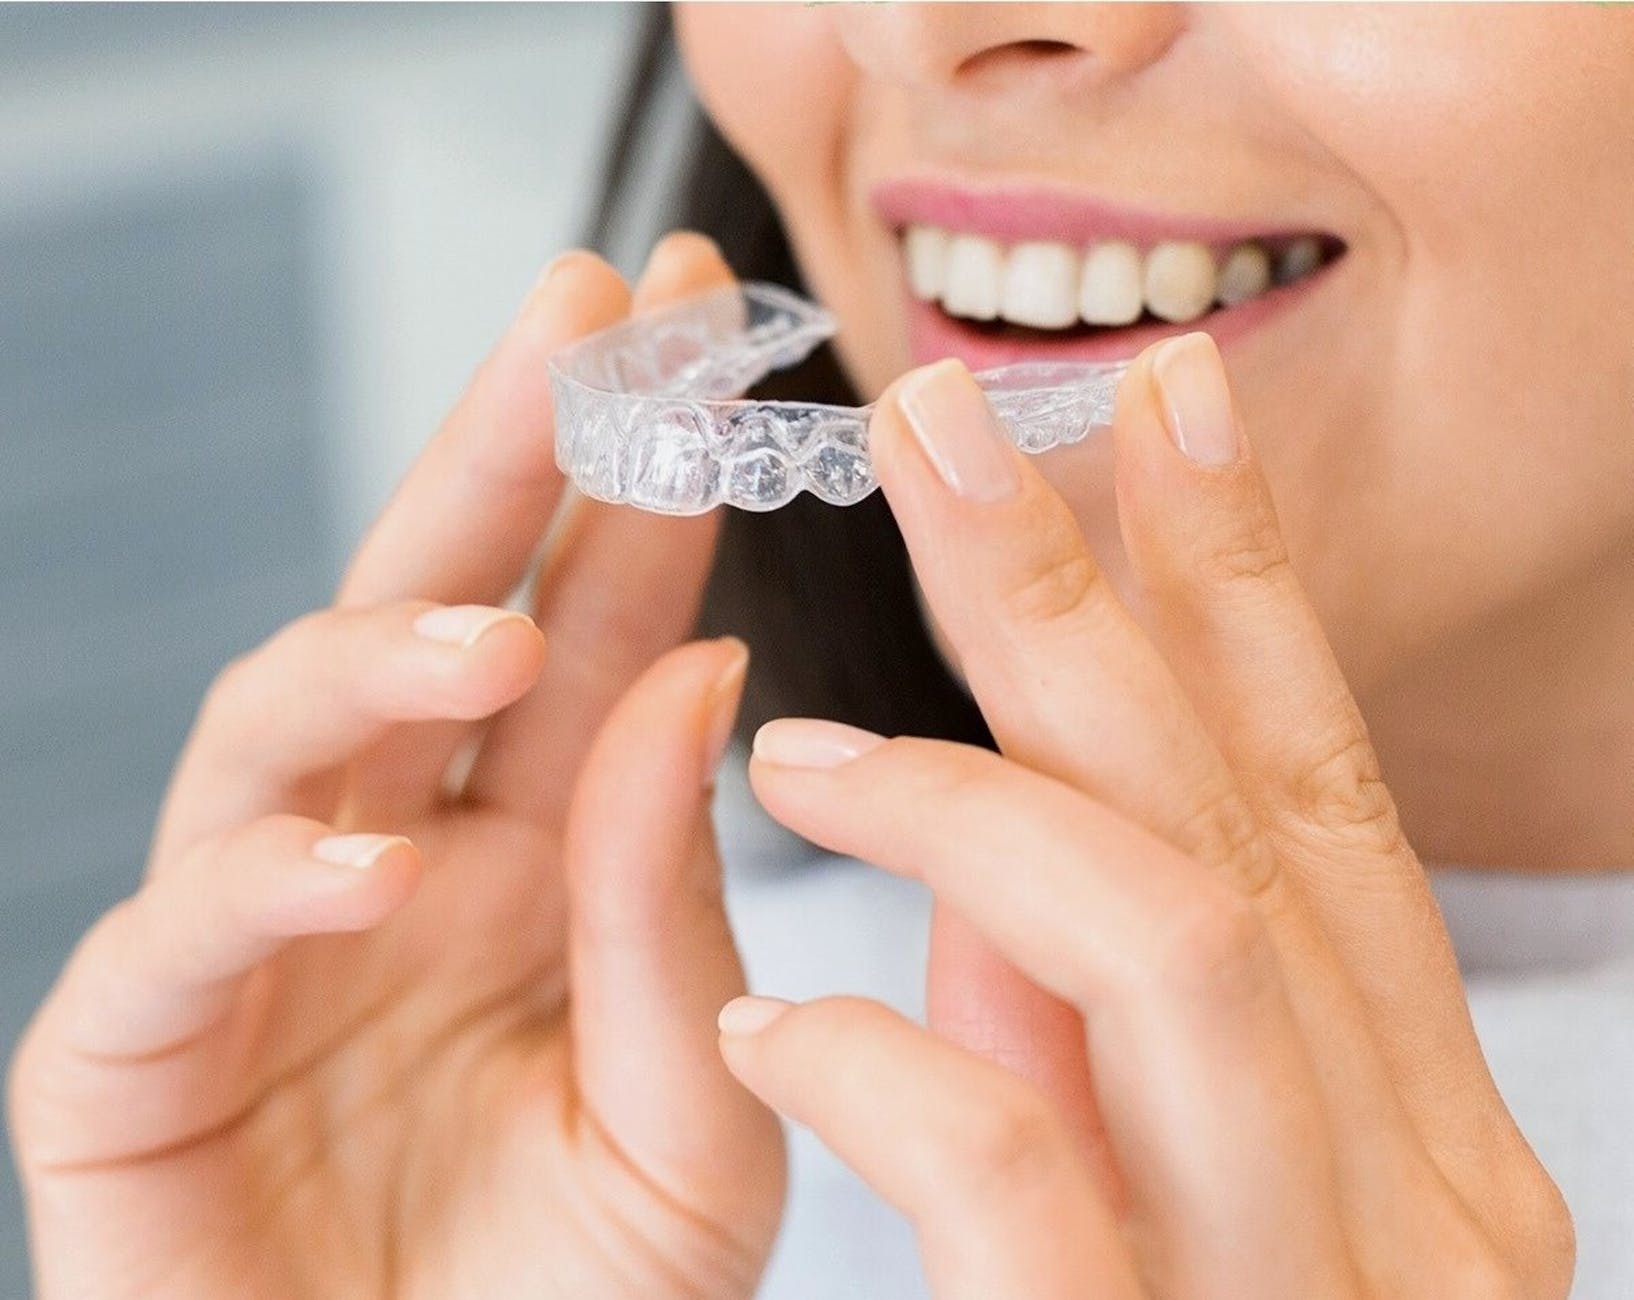 Does Insurance Cover Invisalign?